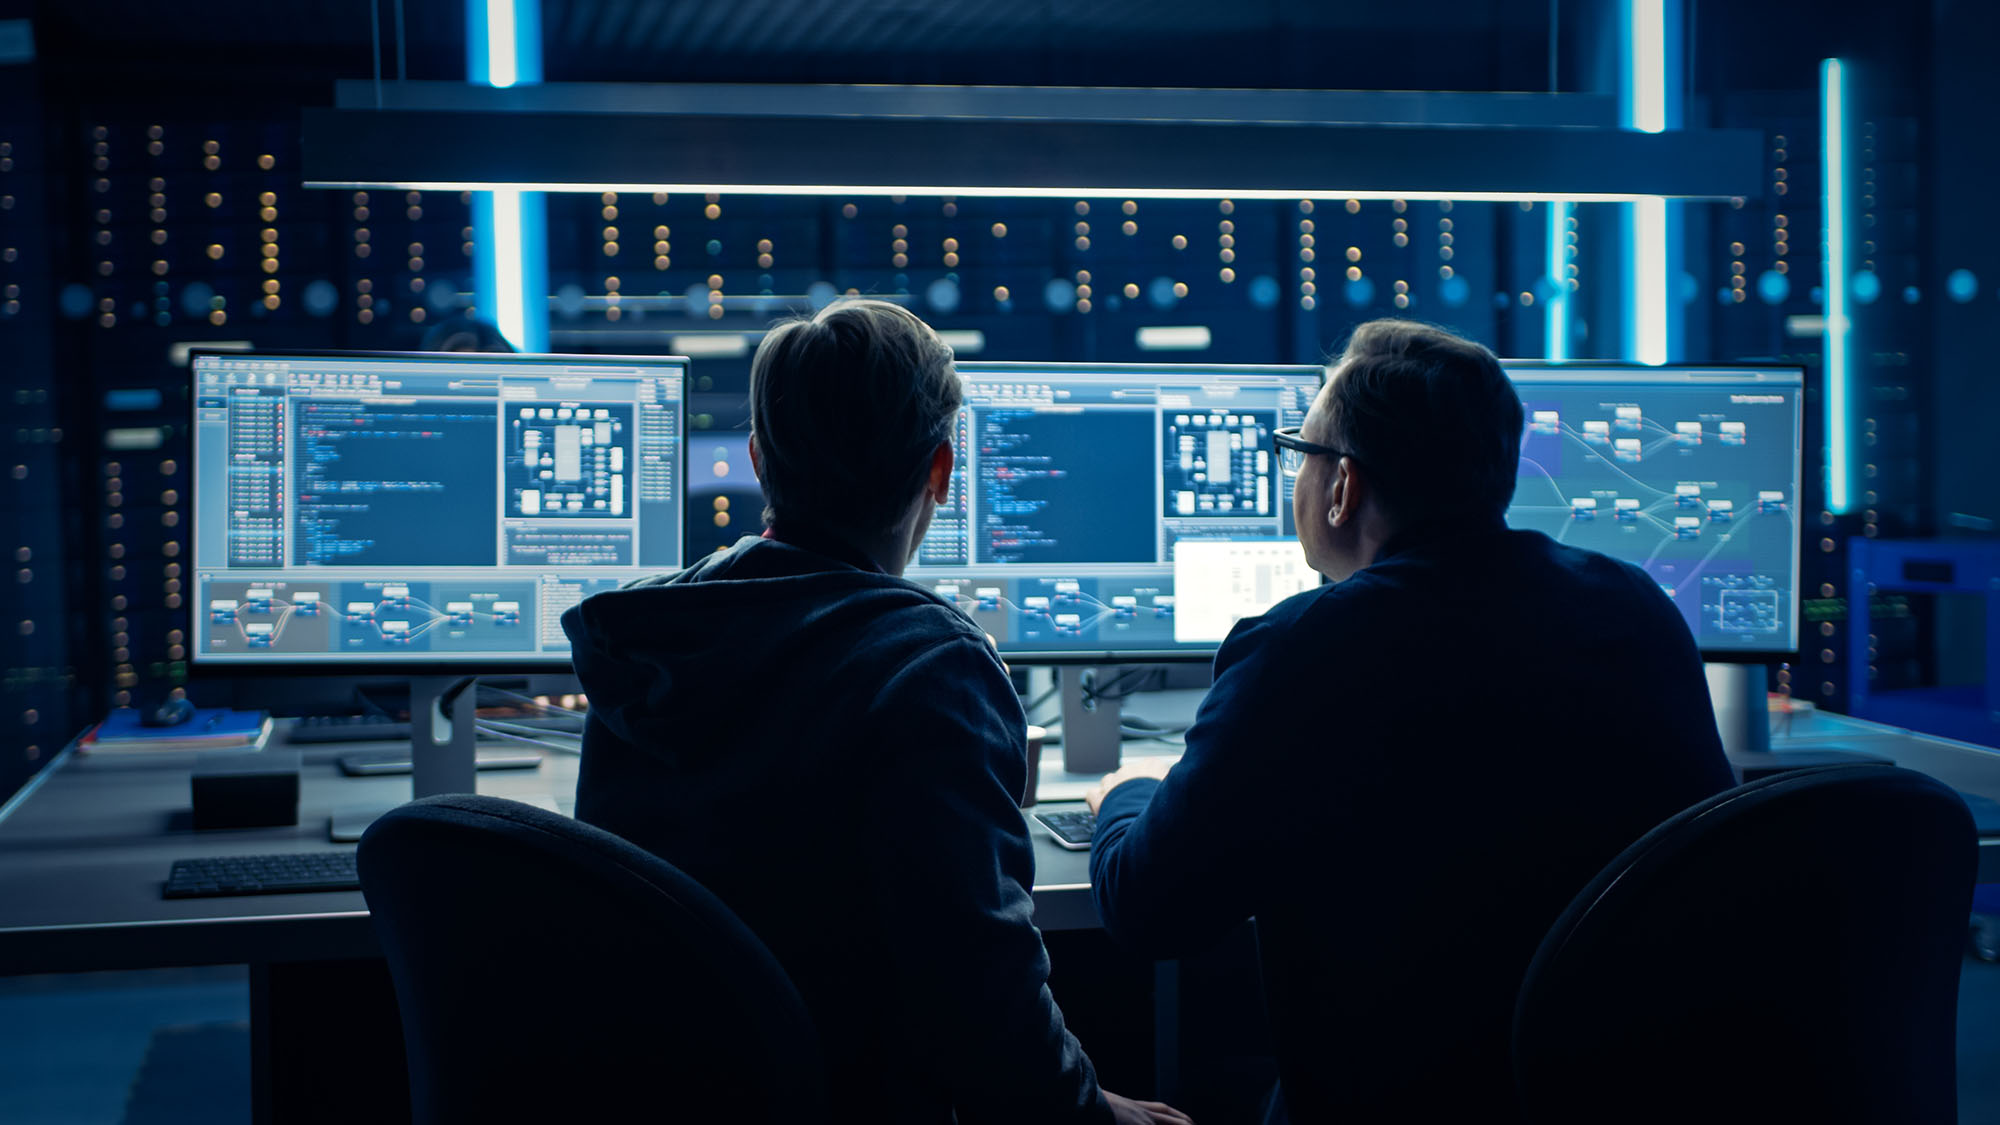 Photo of two people sitting in front many screens filled with code and information. Screens are toned a bright, neon blue as the backs of the two people can be seen in shadow.